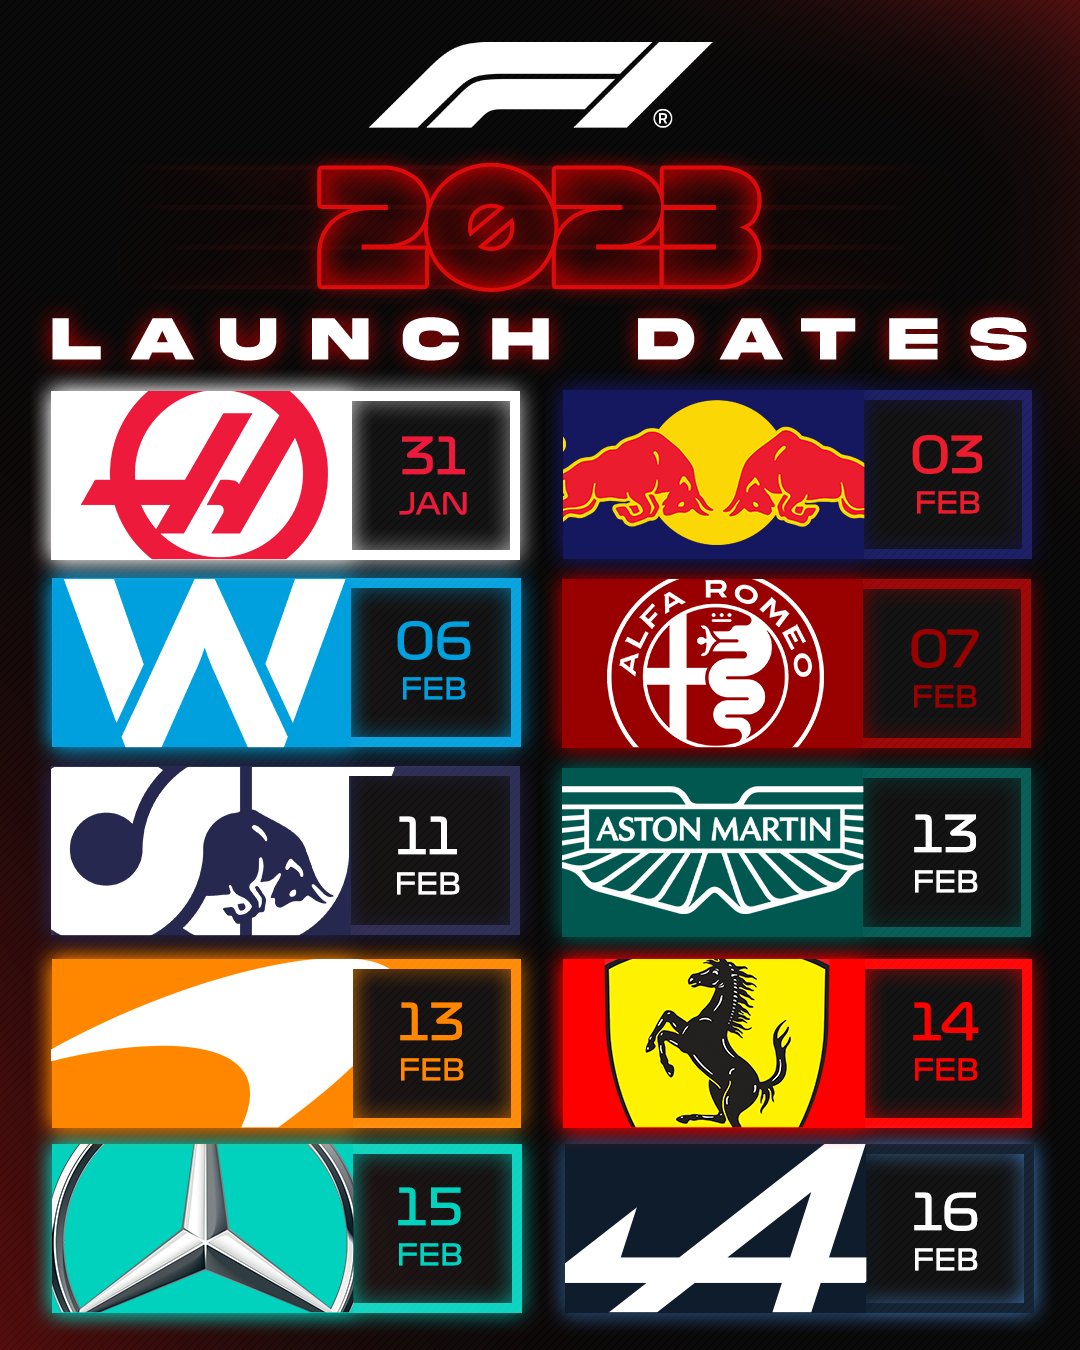 A graphic depicting the different dates on which the F1 teams will launch their 2023 cars, liveries, and seasons. 

Haas: 31 January, Red Bull: 3 February, Williams: 6 February, Alfa Romeo: 7 February, AlphaTauri: 11 February, Aston Martin: 13 February, McLaren: 13 February, Ferrari: 14 February, Mercedes: 15 February, Alpine: 16 February